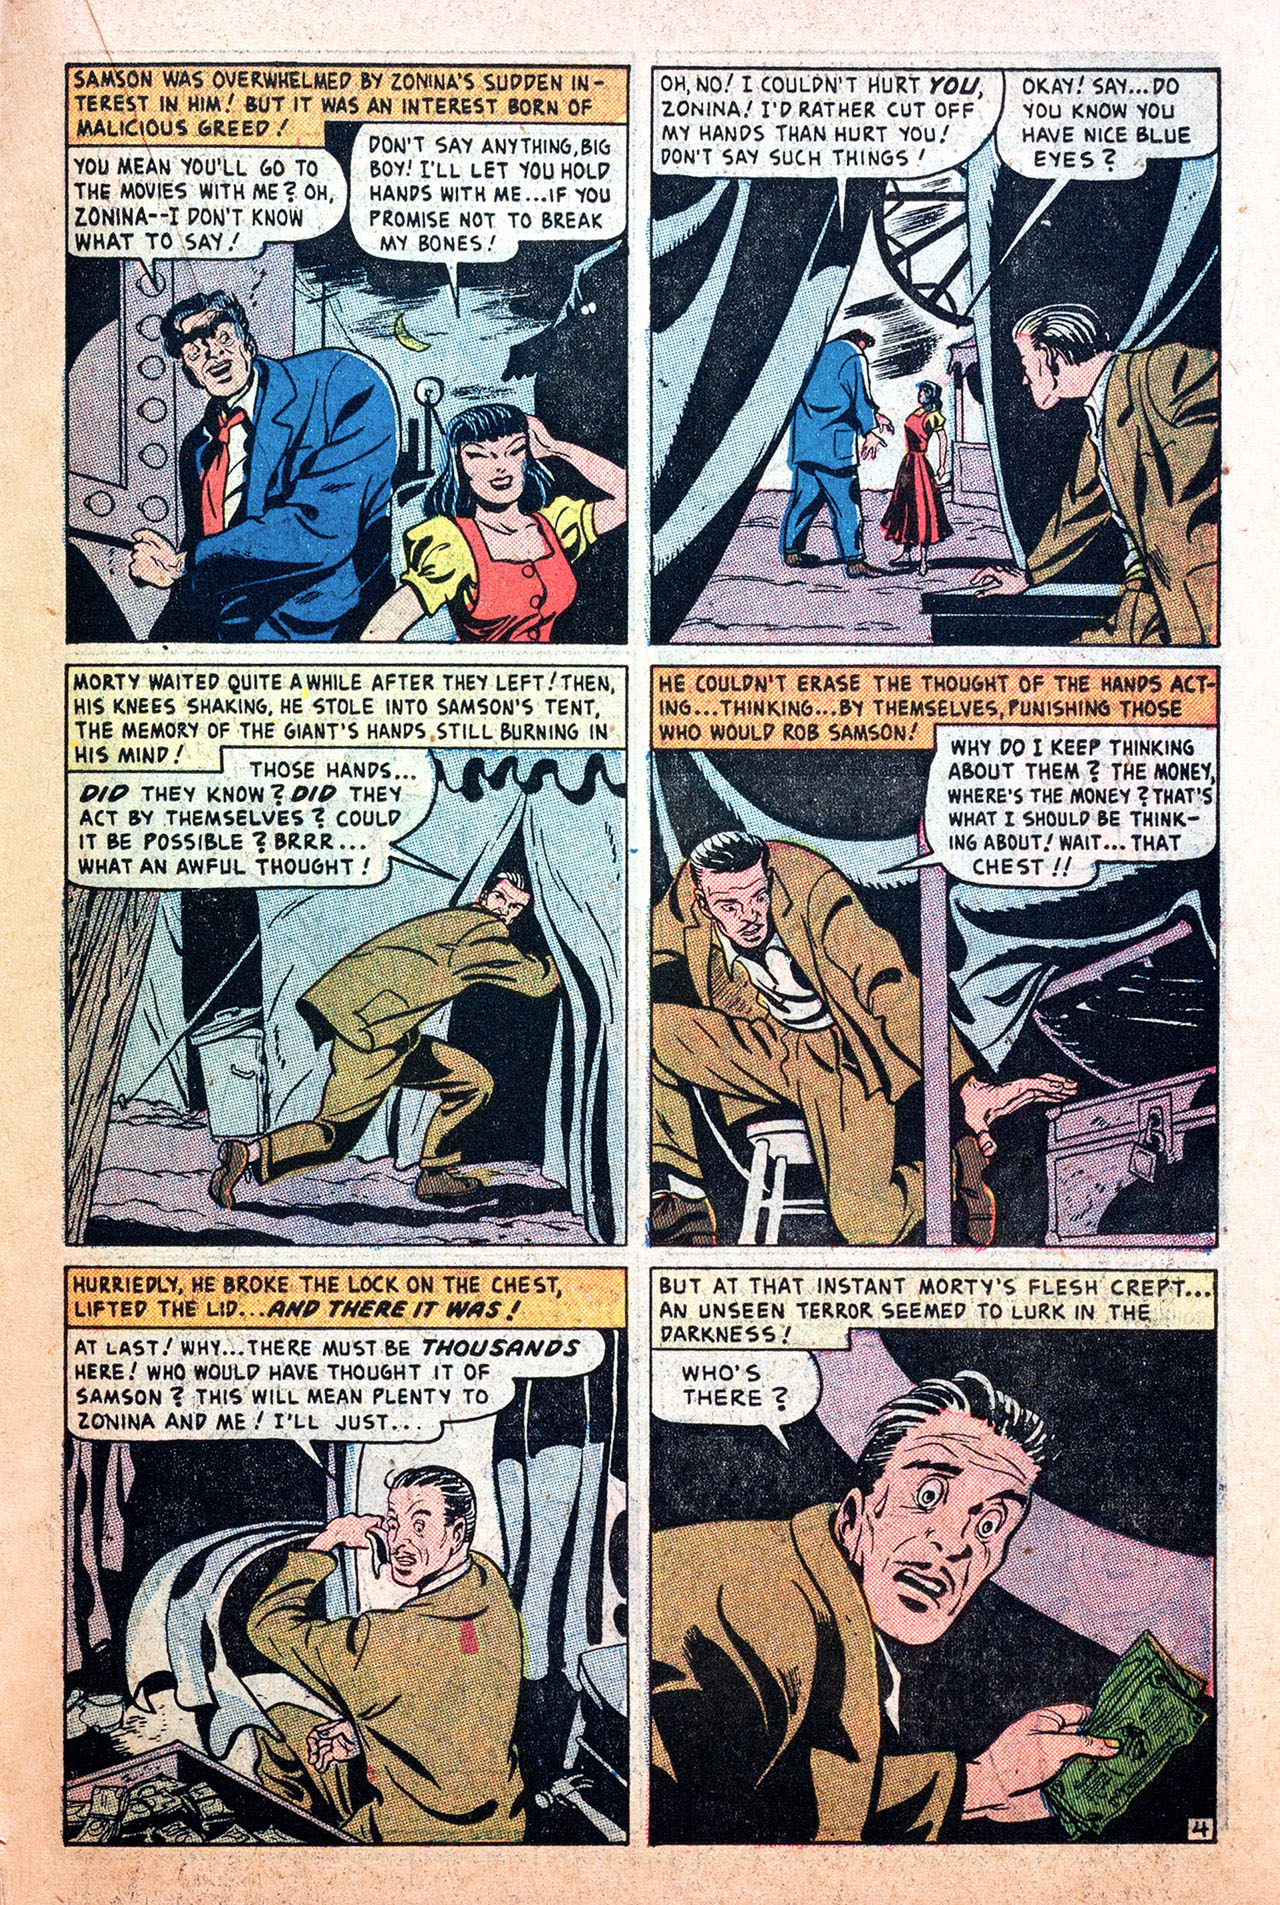 Marvel Tales (1949) 94 Page 22